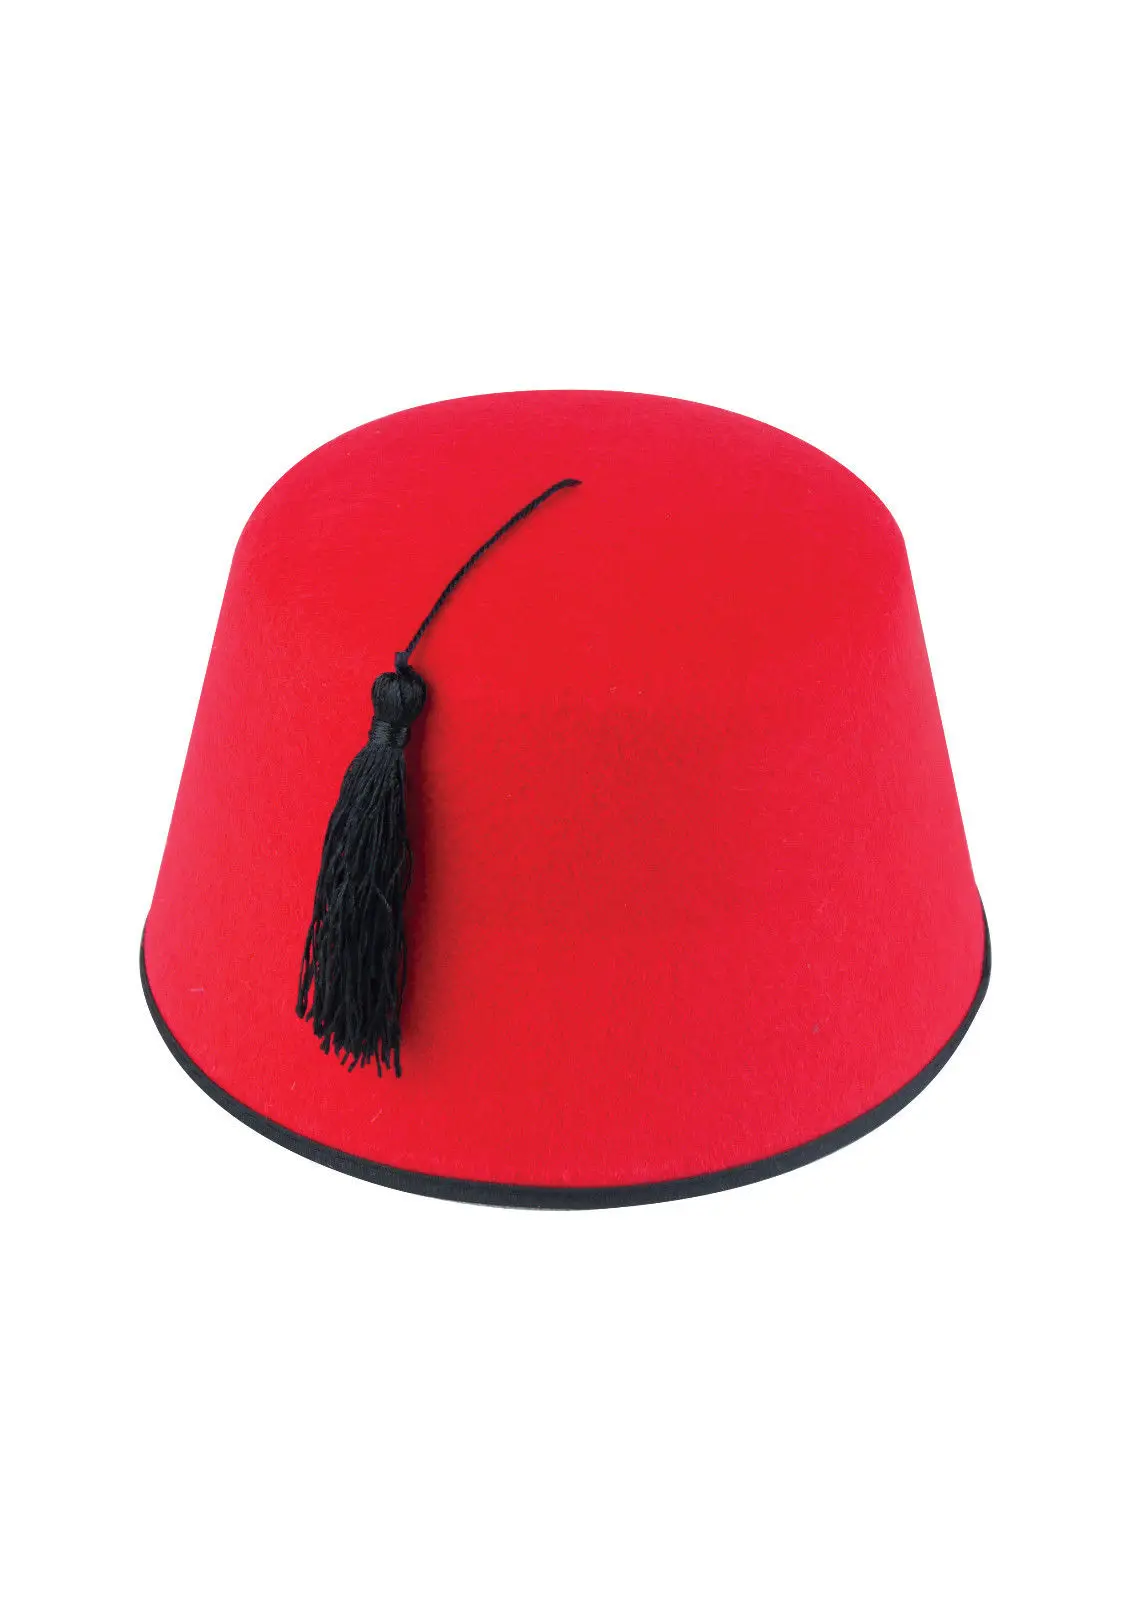 Fez Hat Red Moroccan Turkish Hat Tommy Cooper Costume Fancy Dress Up 